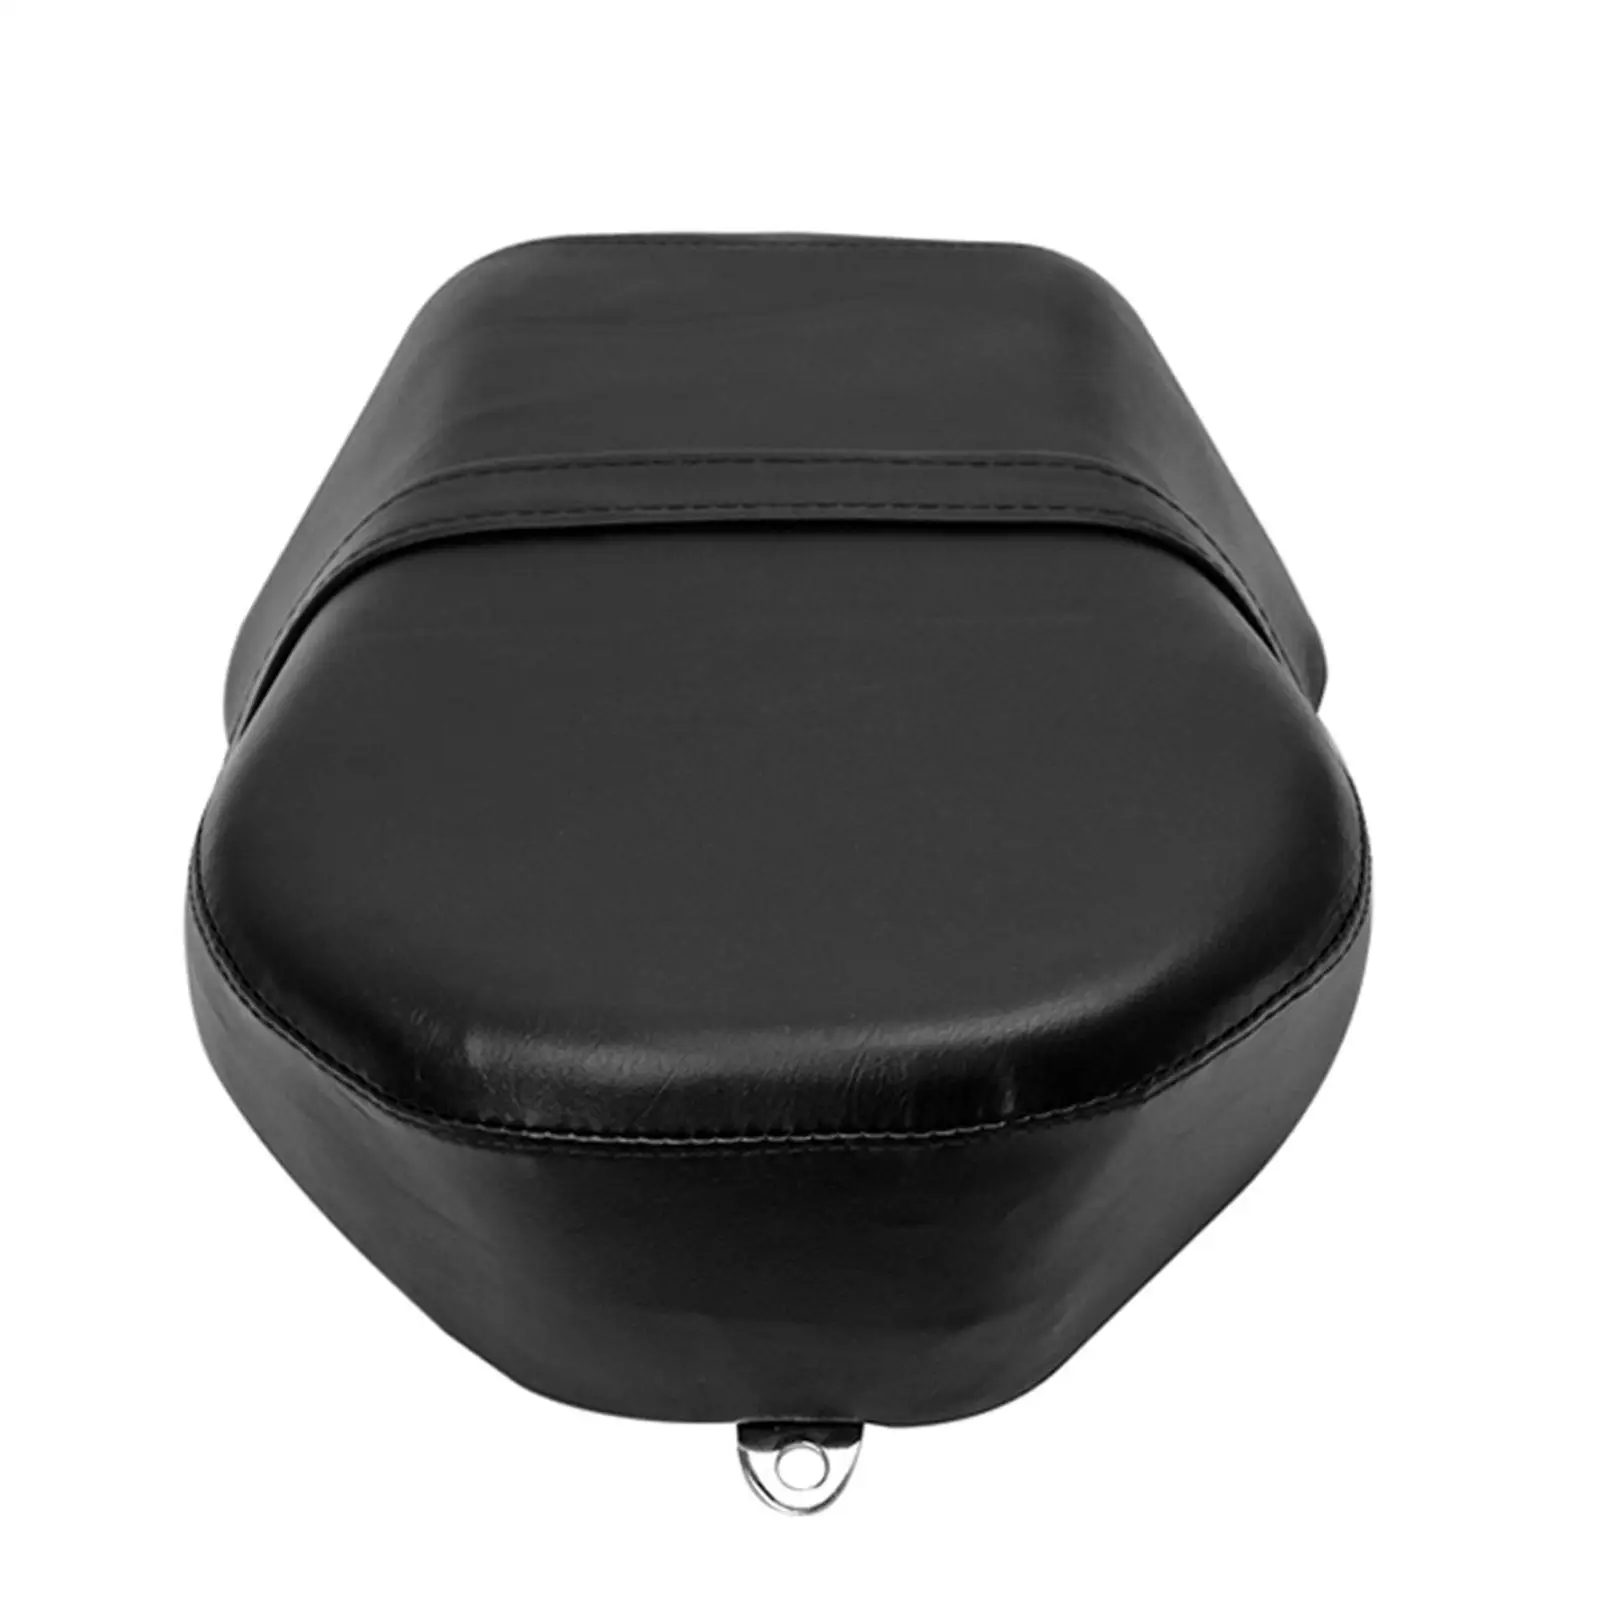 Motorcycle Pillion Passenger Pad Seat for Harley Sportster Replaces